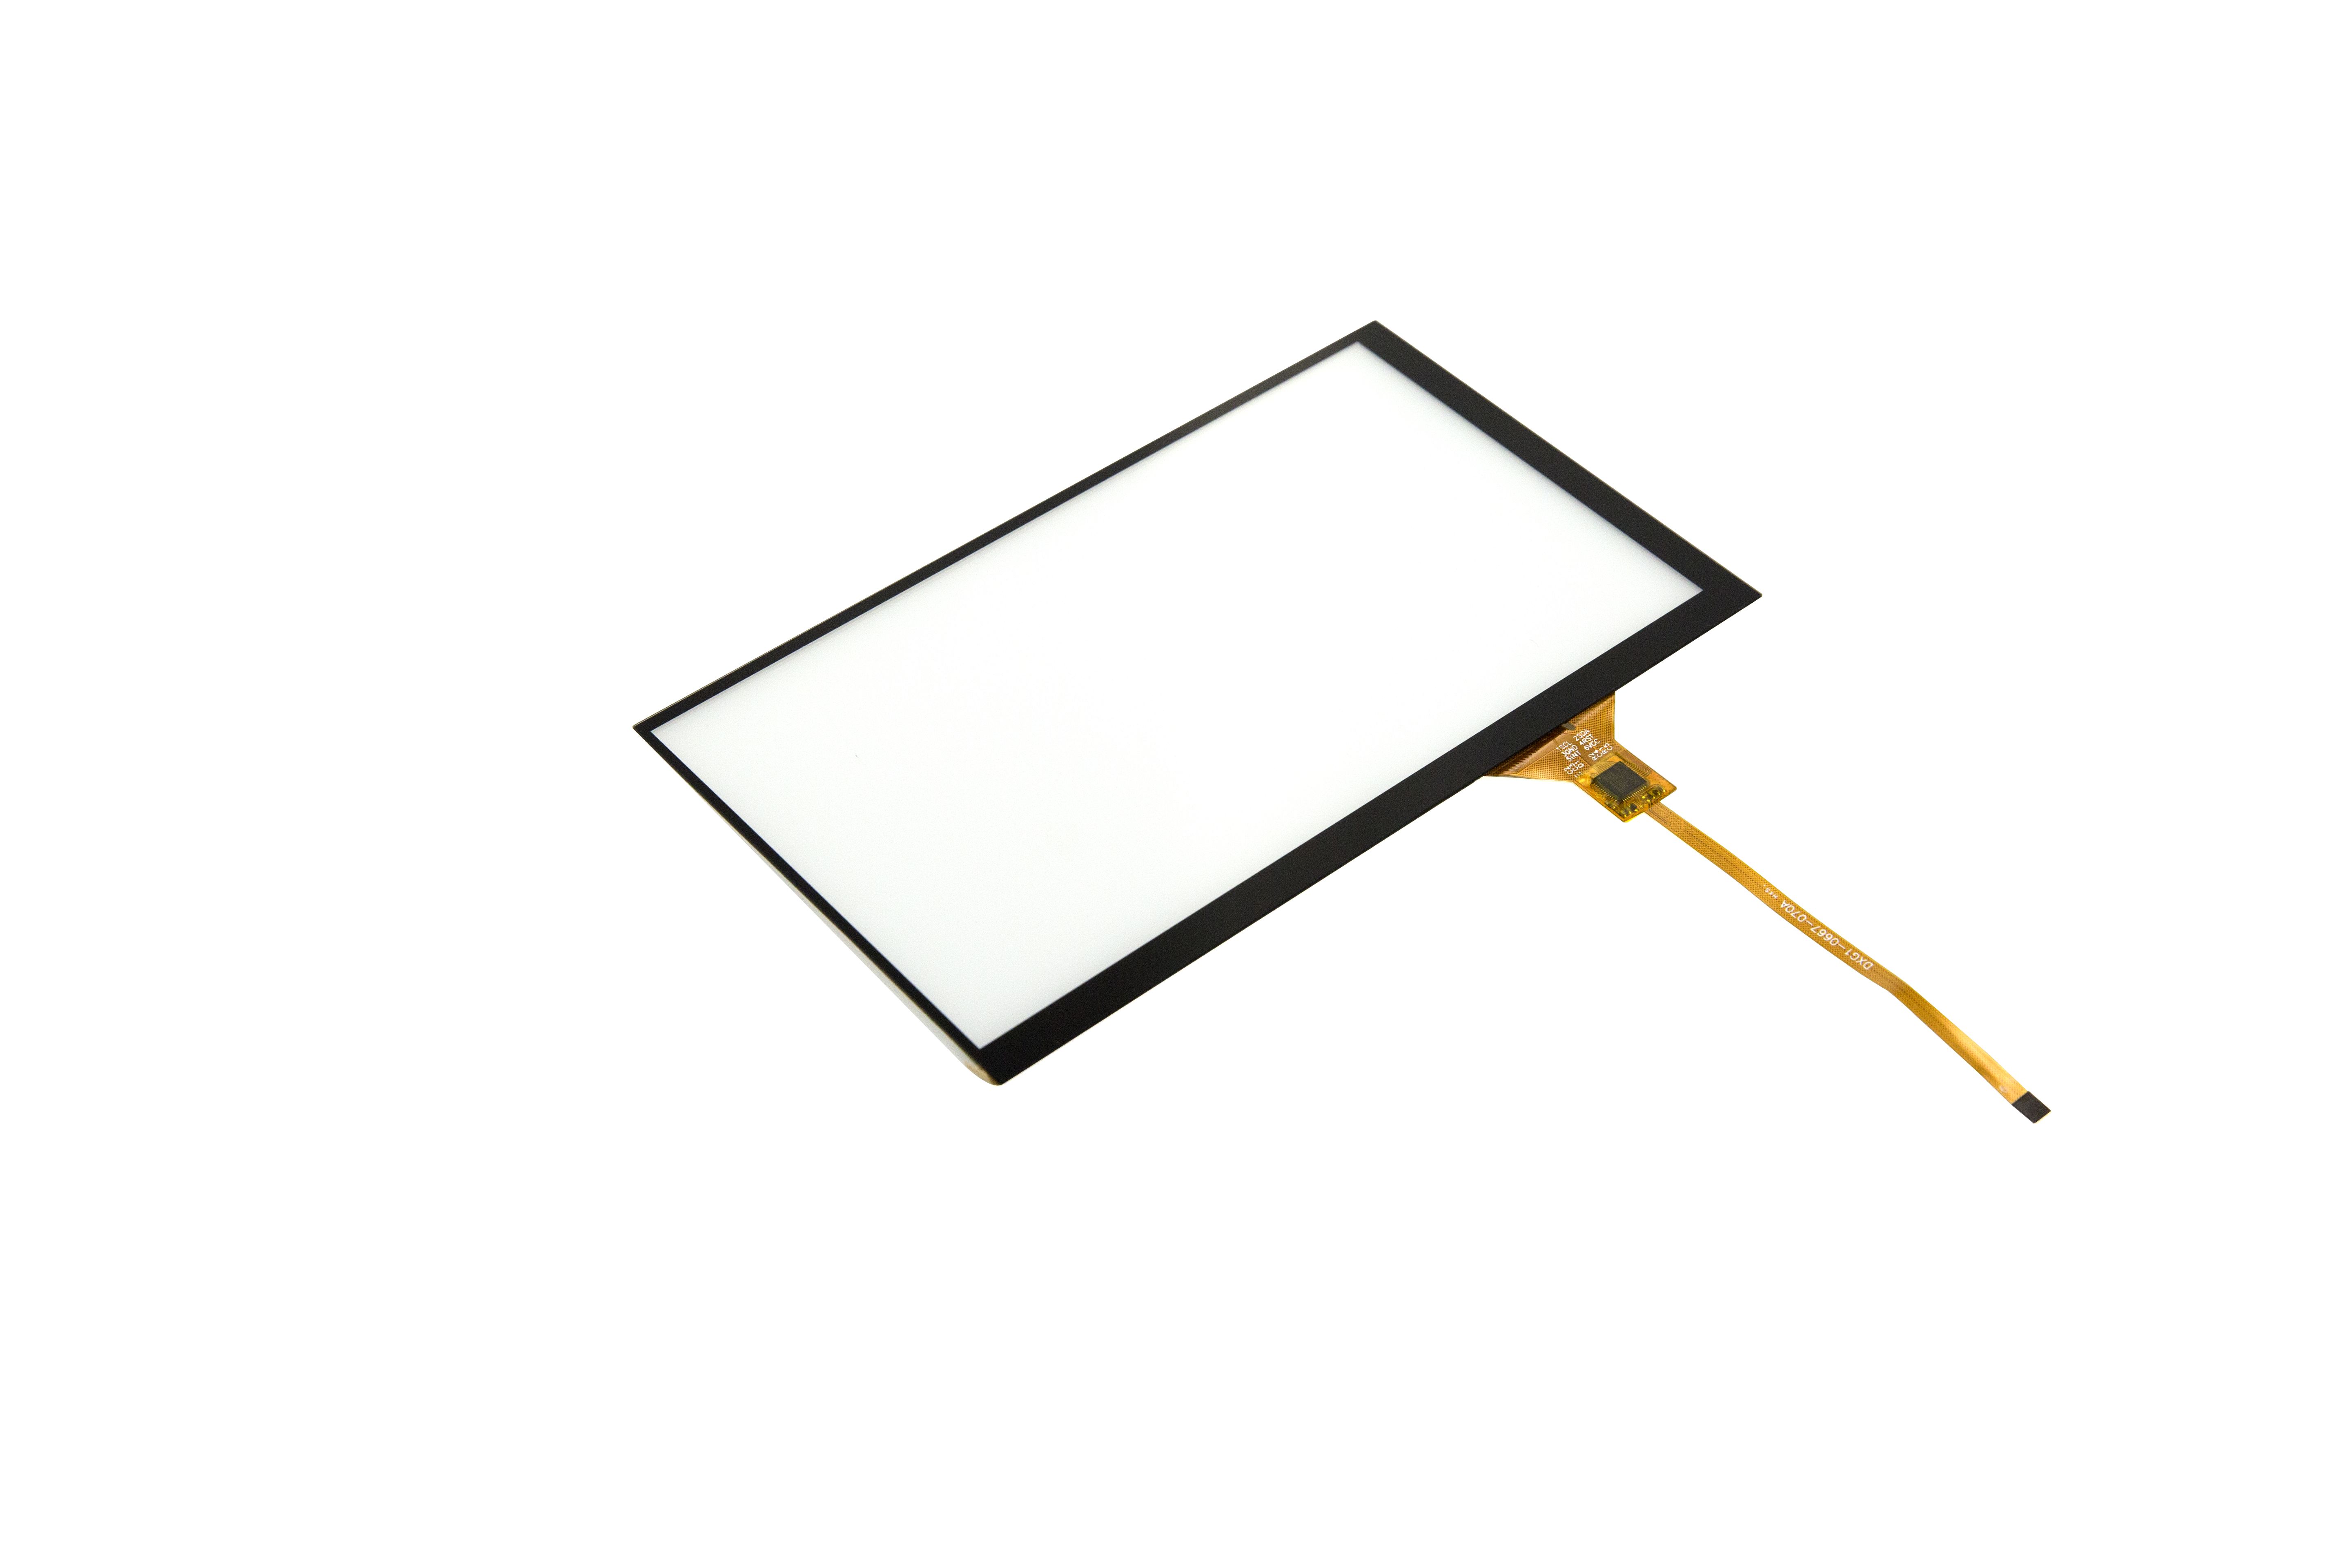 DFRobot FIT0478, 7" Capacitive Touch Panel Overlay For LattePanda V1 IPS Display 7in Development Board With LCD(Liquid